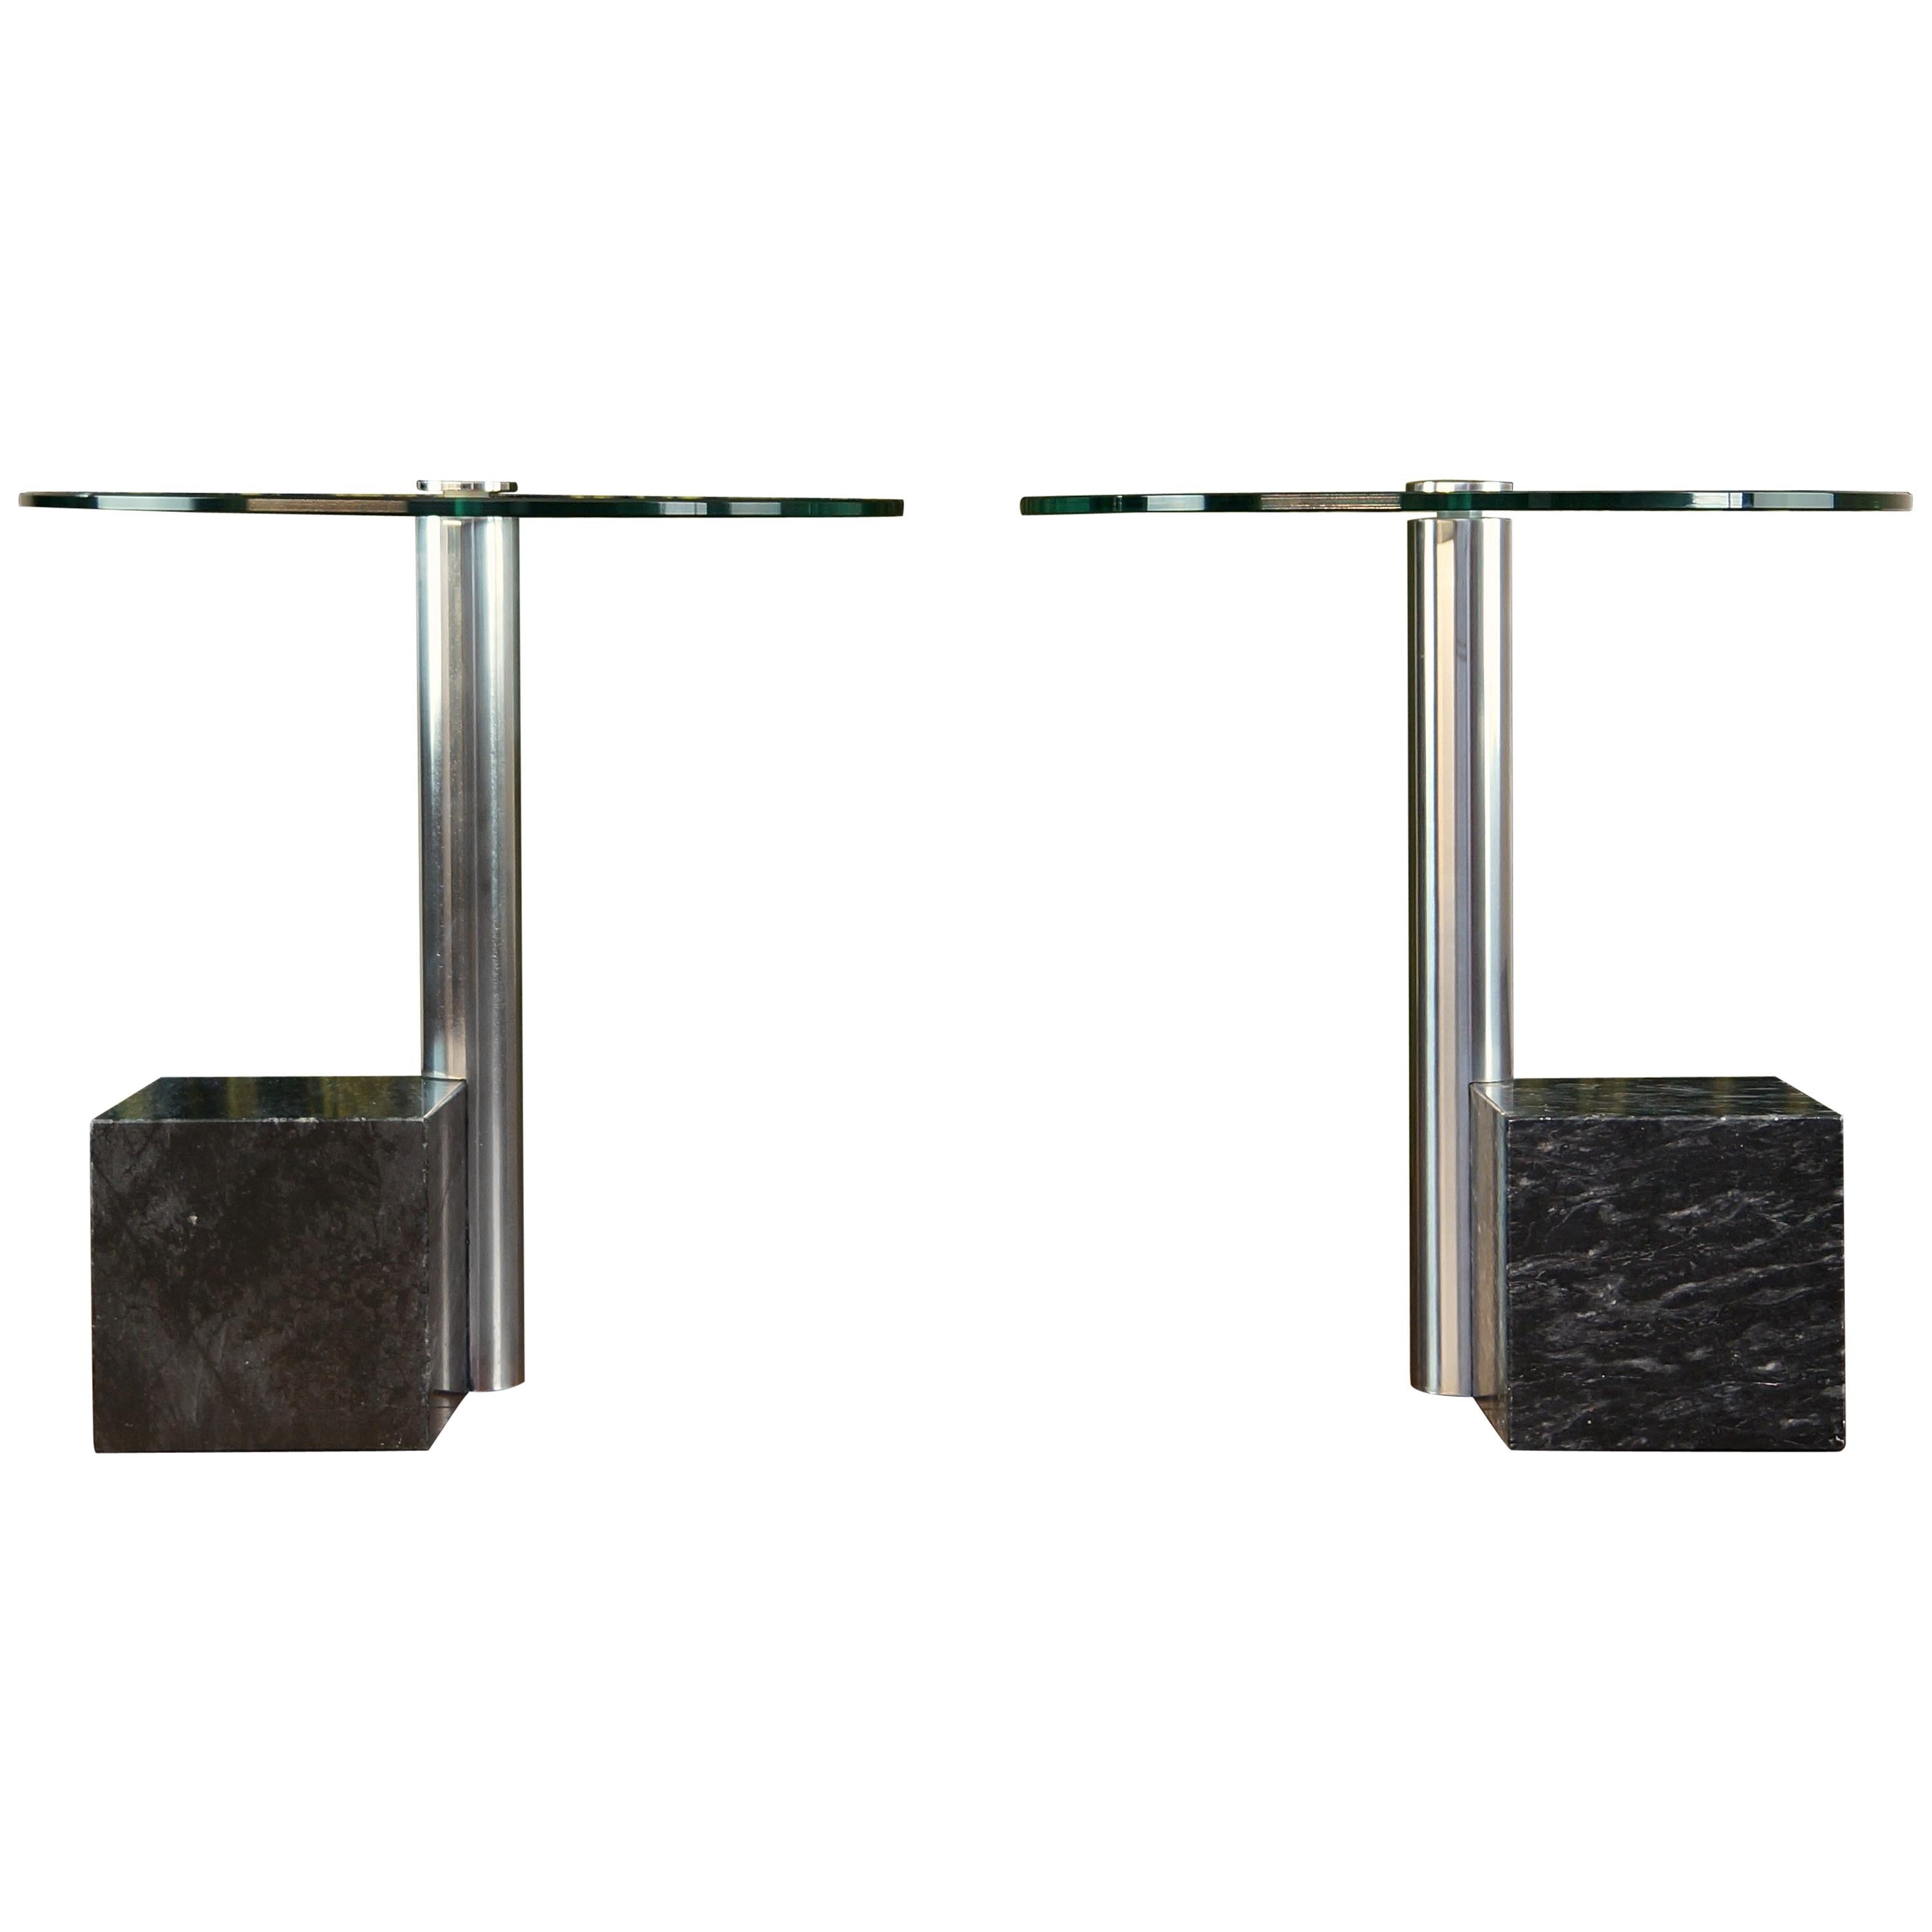 Pair of Vintage Marble and Glass HK2 Side Tables by Hank Kwint, Metaform 1980s For Sale